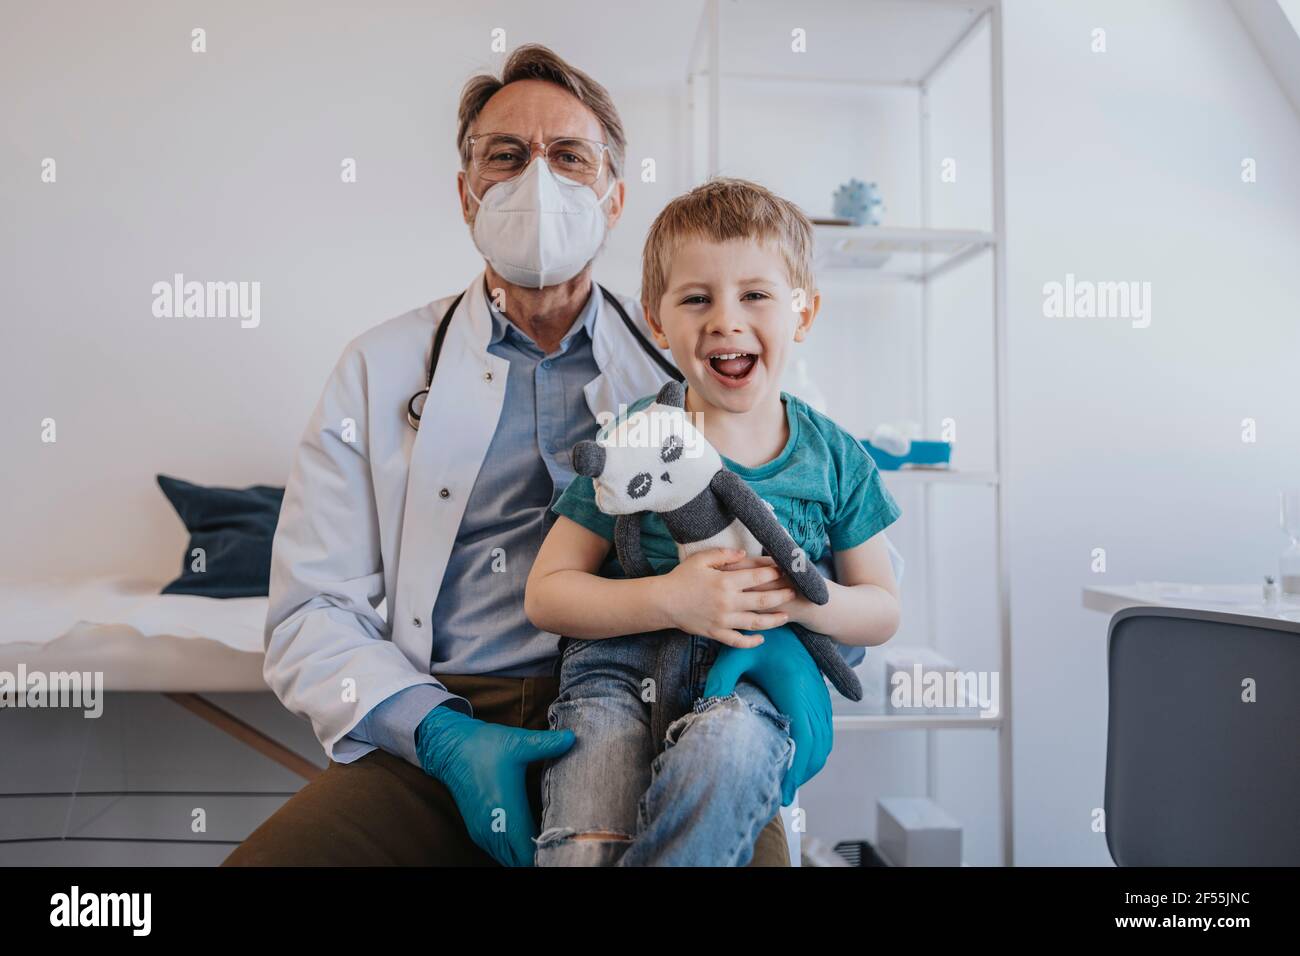 Cheerful boy laughing while sitting on doctor's lap at medical examination room Stock Photo